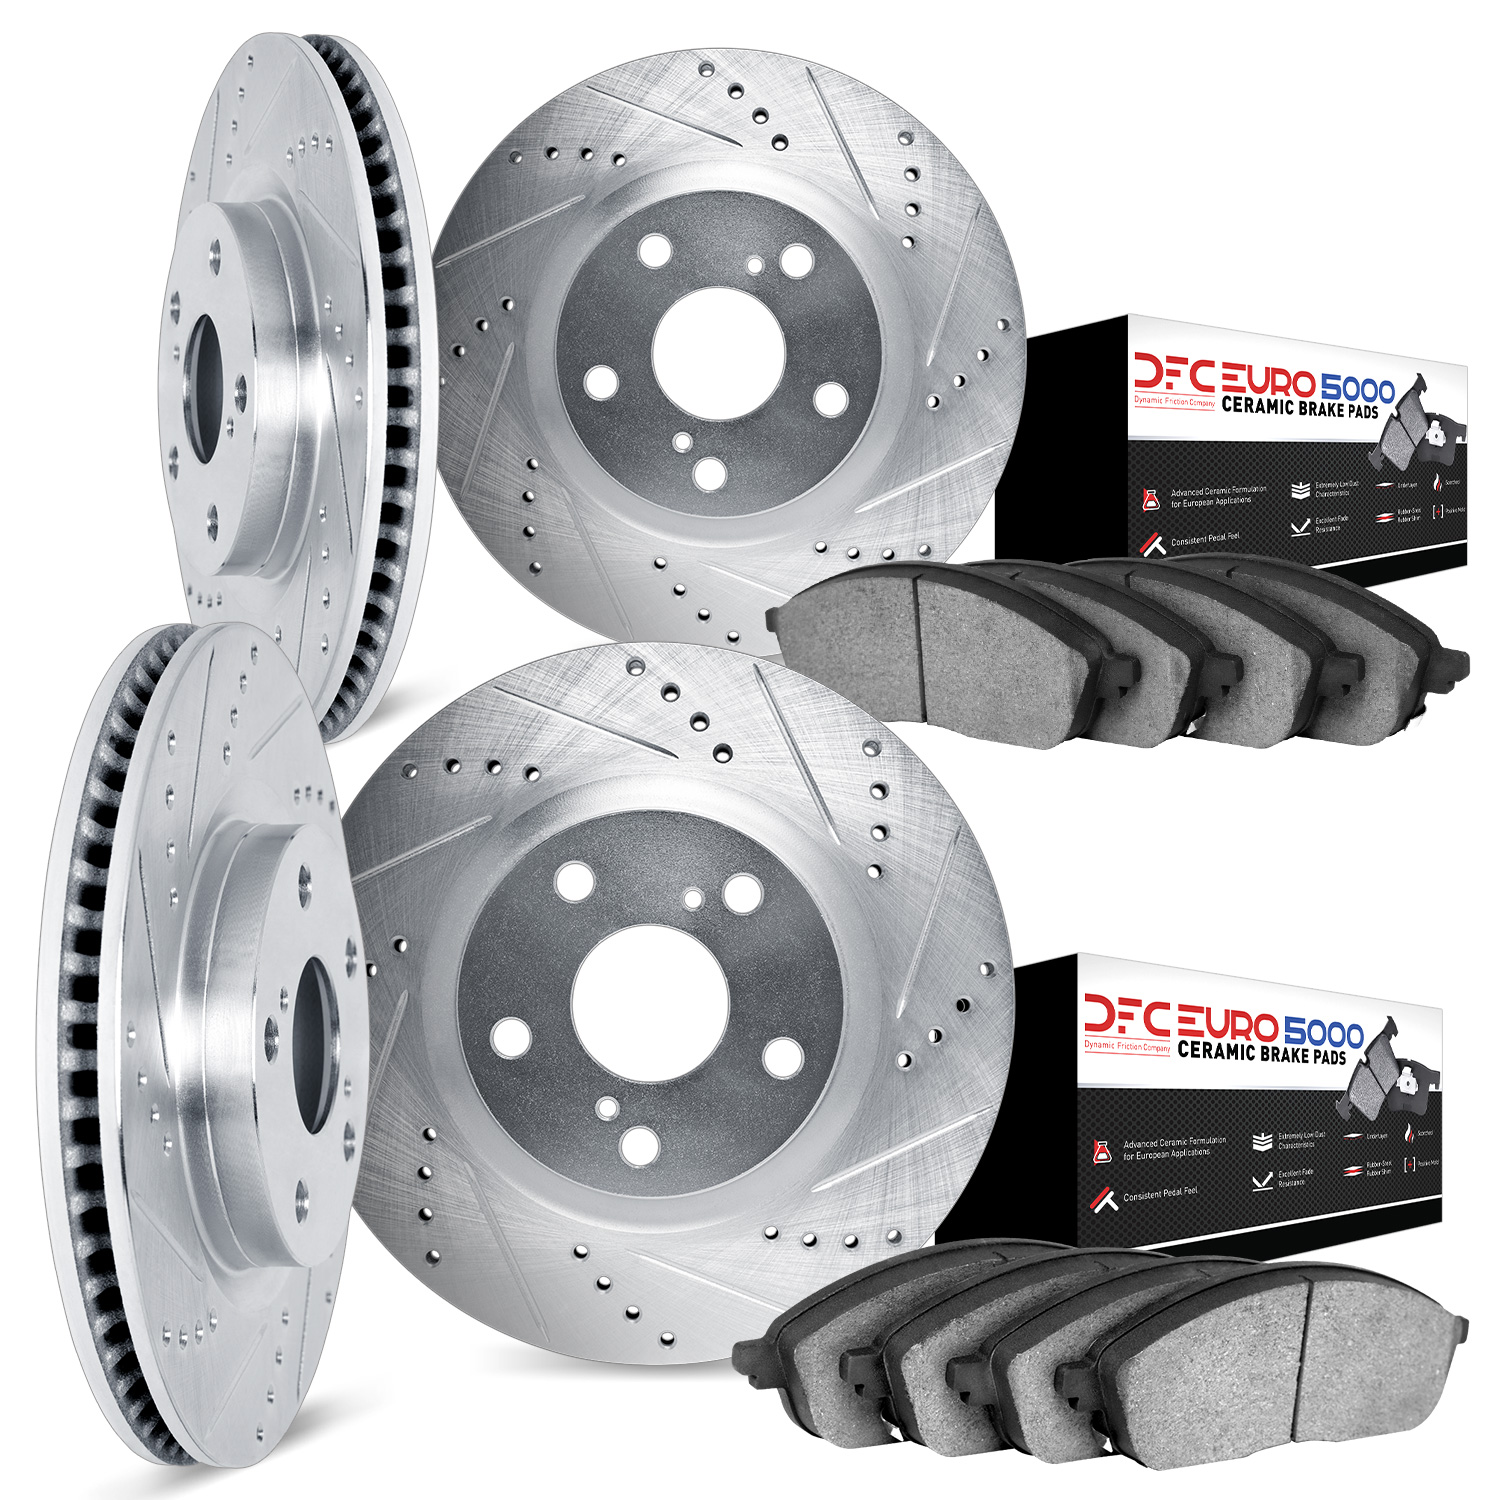 7604-31033 Drilled/Slotted Brake Rotors w/5000 Euro Ceramic Brake Pads Kit [Silver], 2007-2019 BMW, Position: Front and Rear